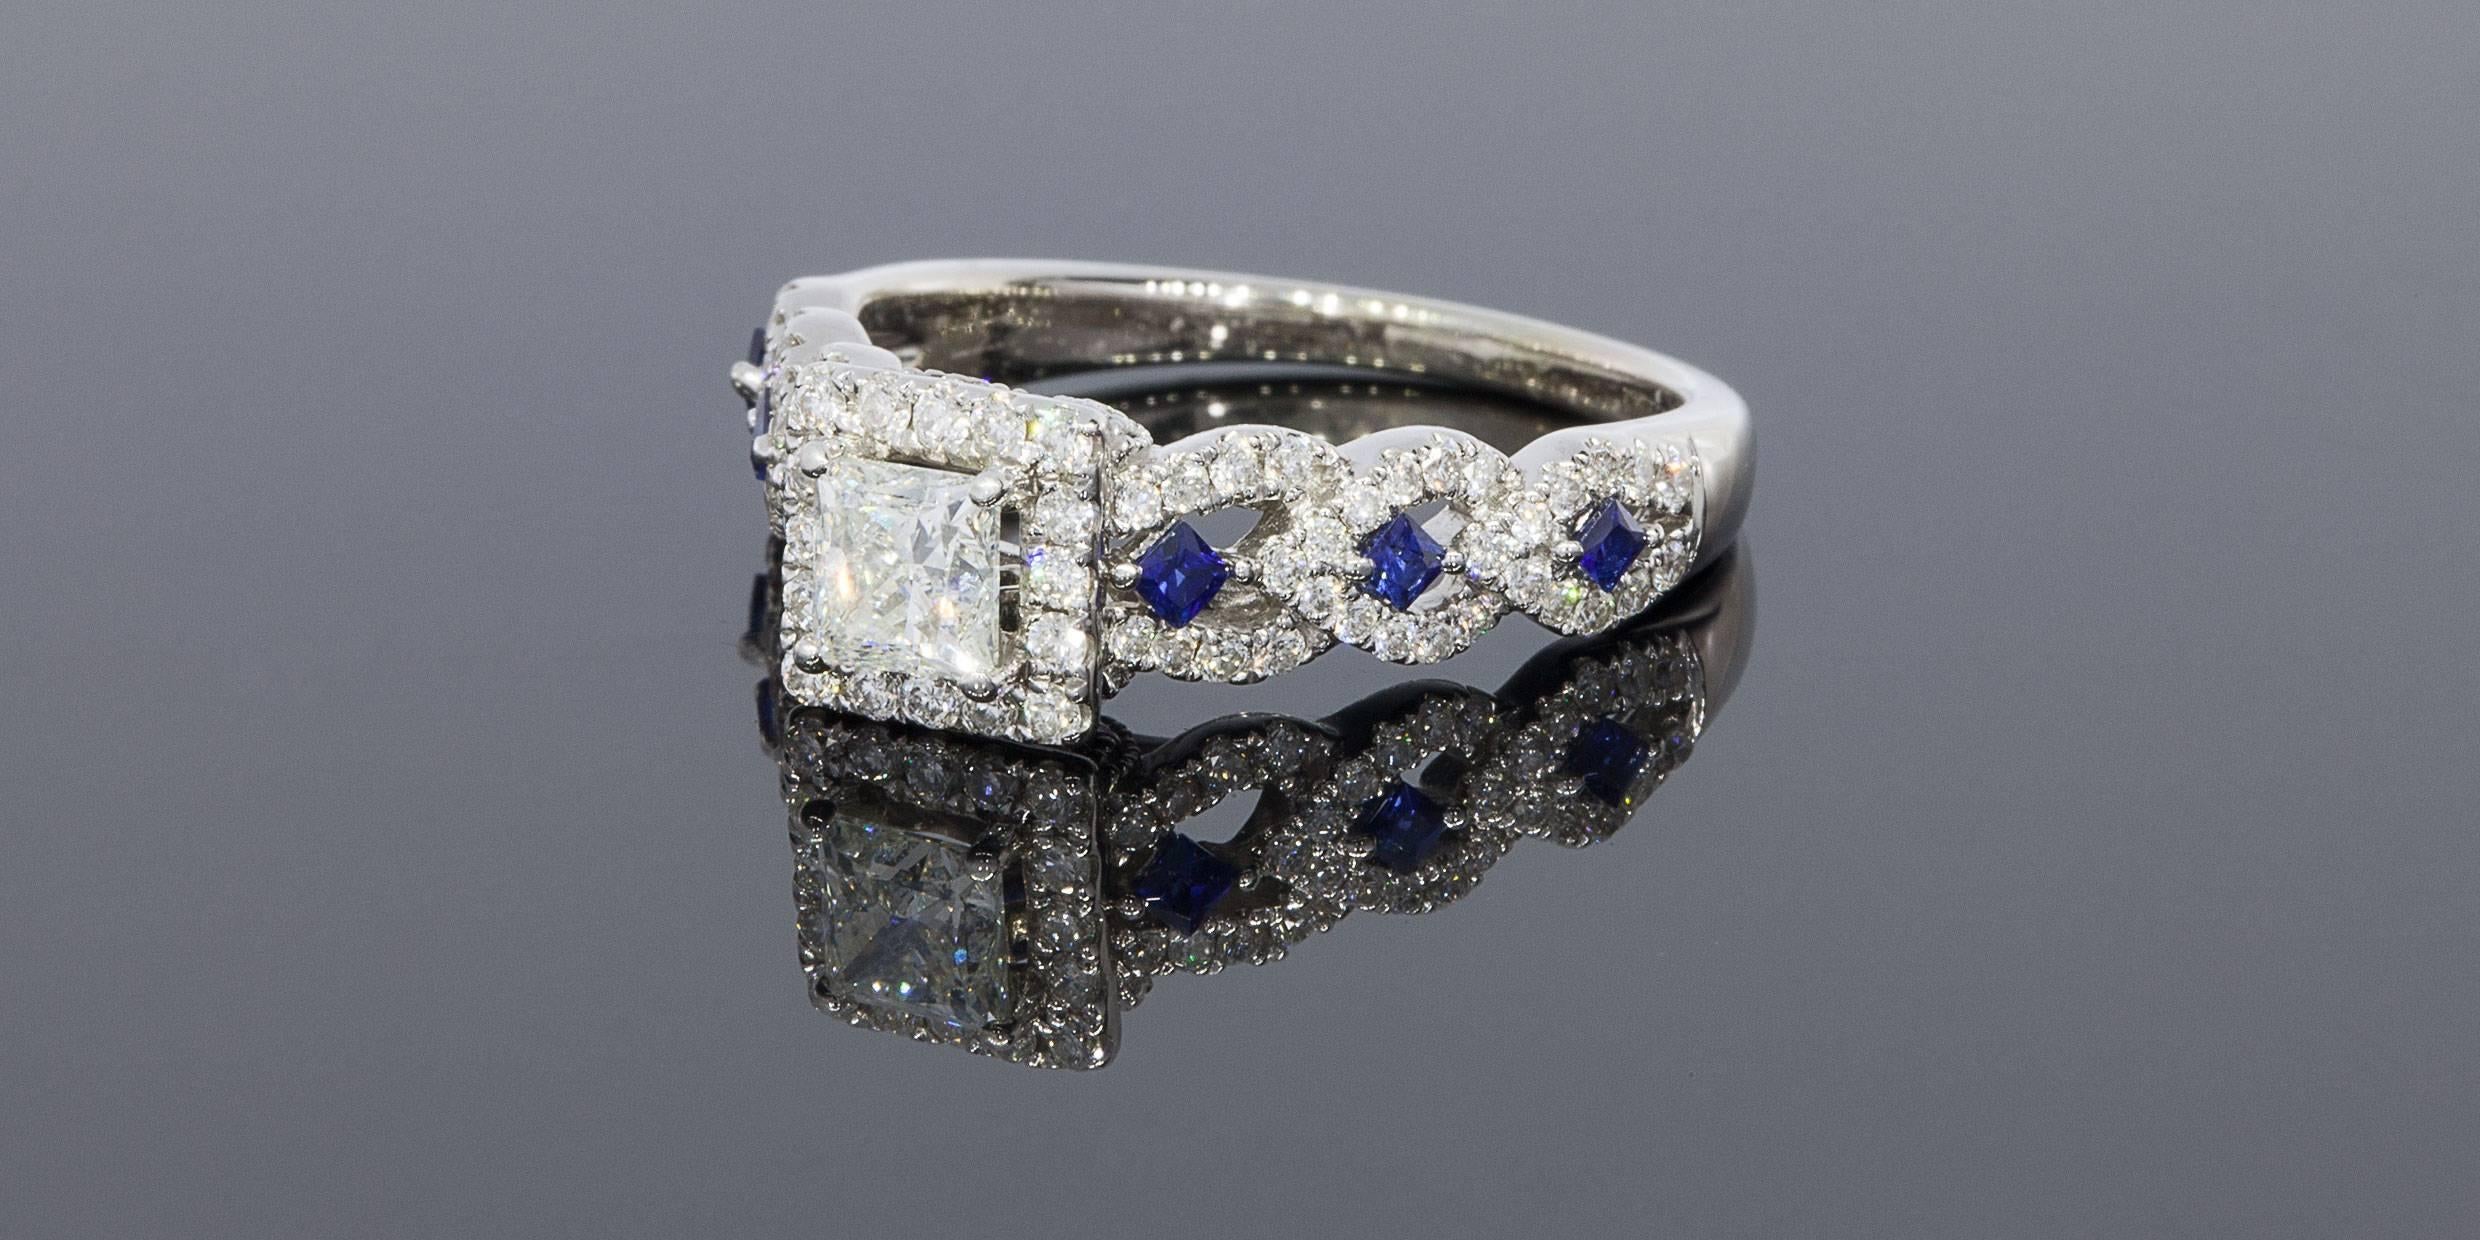 From the Vera Wang LOVE Collection, this captivating 14 karat white gold diamond and blue sapphire engagement ring offers incomparable beauty and unmatched quality. Take her breath away with this remarkable design, which features a 1/2 carat